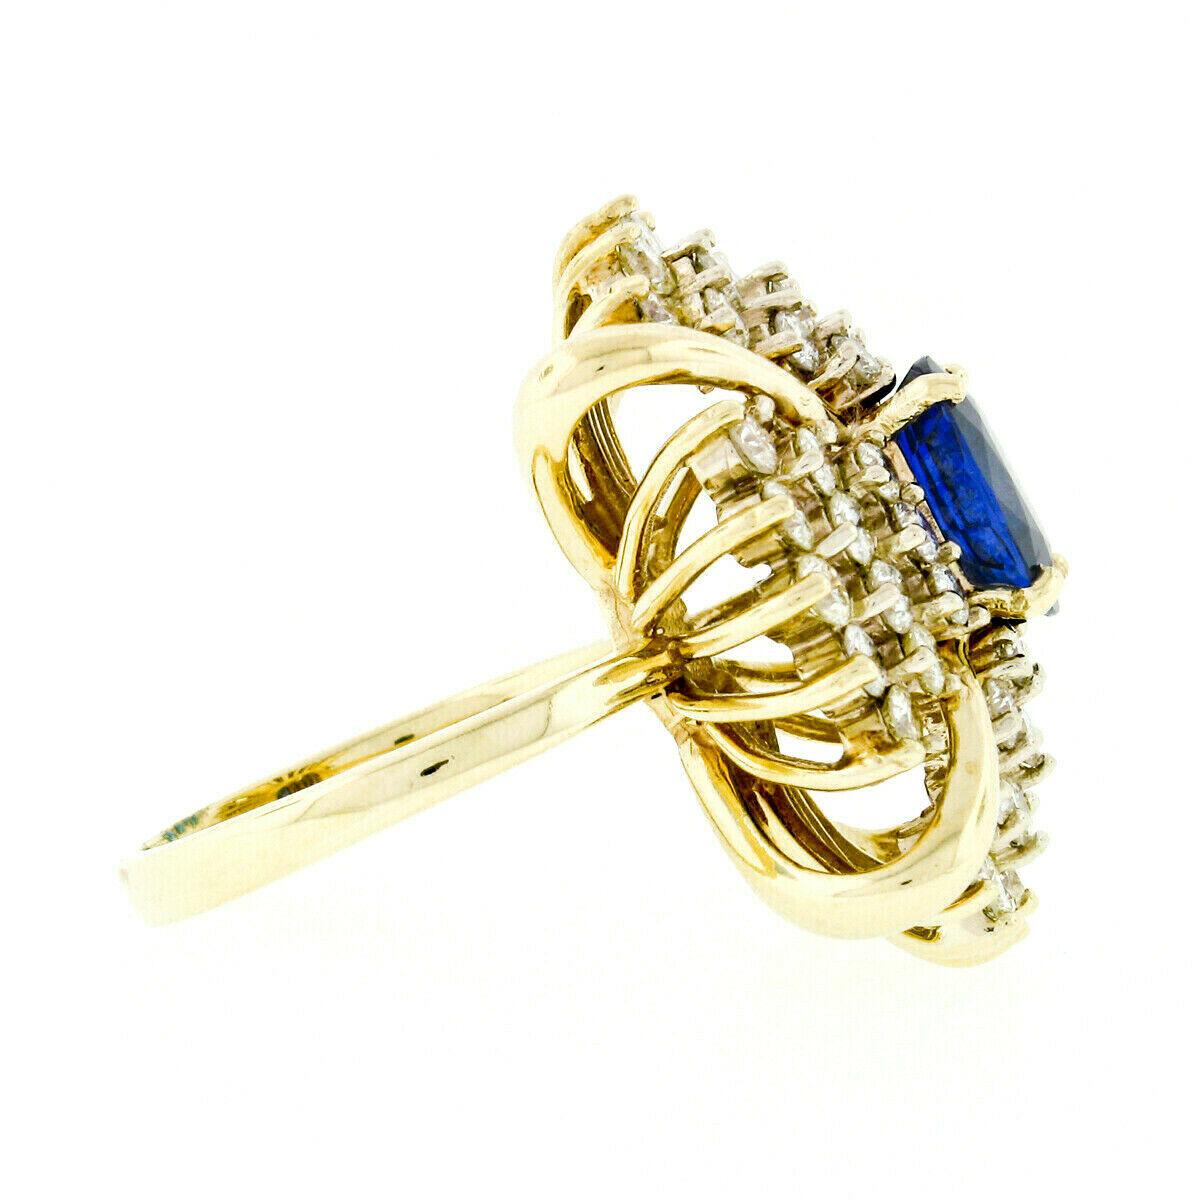 Large Vintage 14k Gold 6.24ctw GIA Oval Ceylon Sapphire & Diamond Cocktail Ring For Sale 3